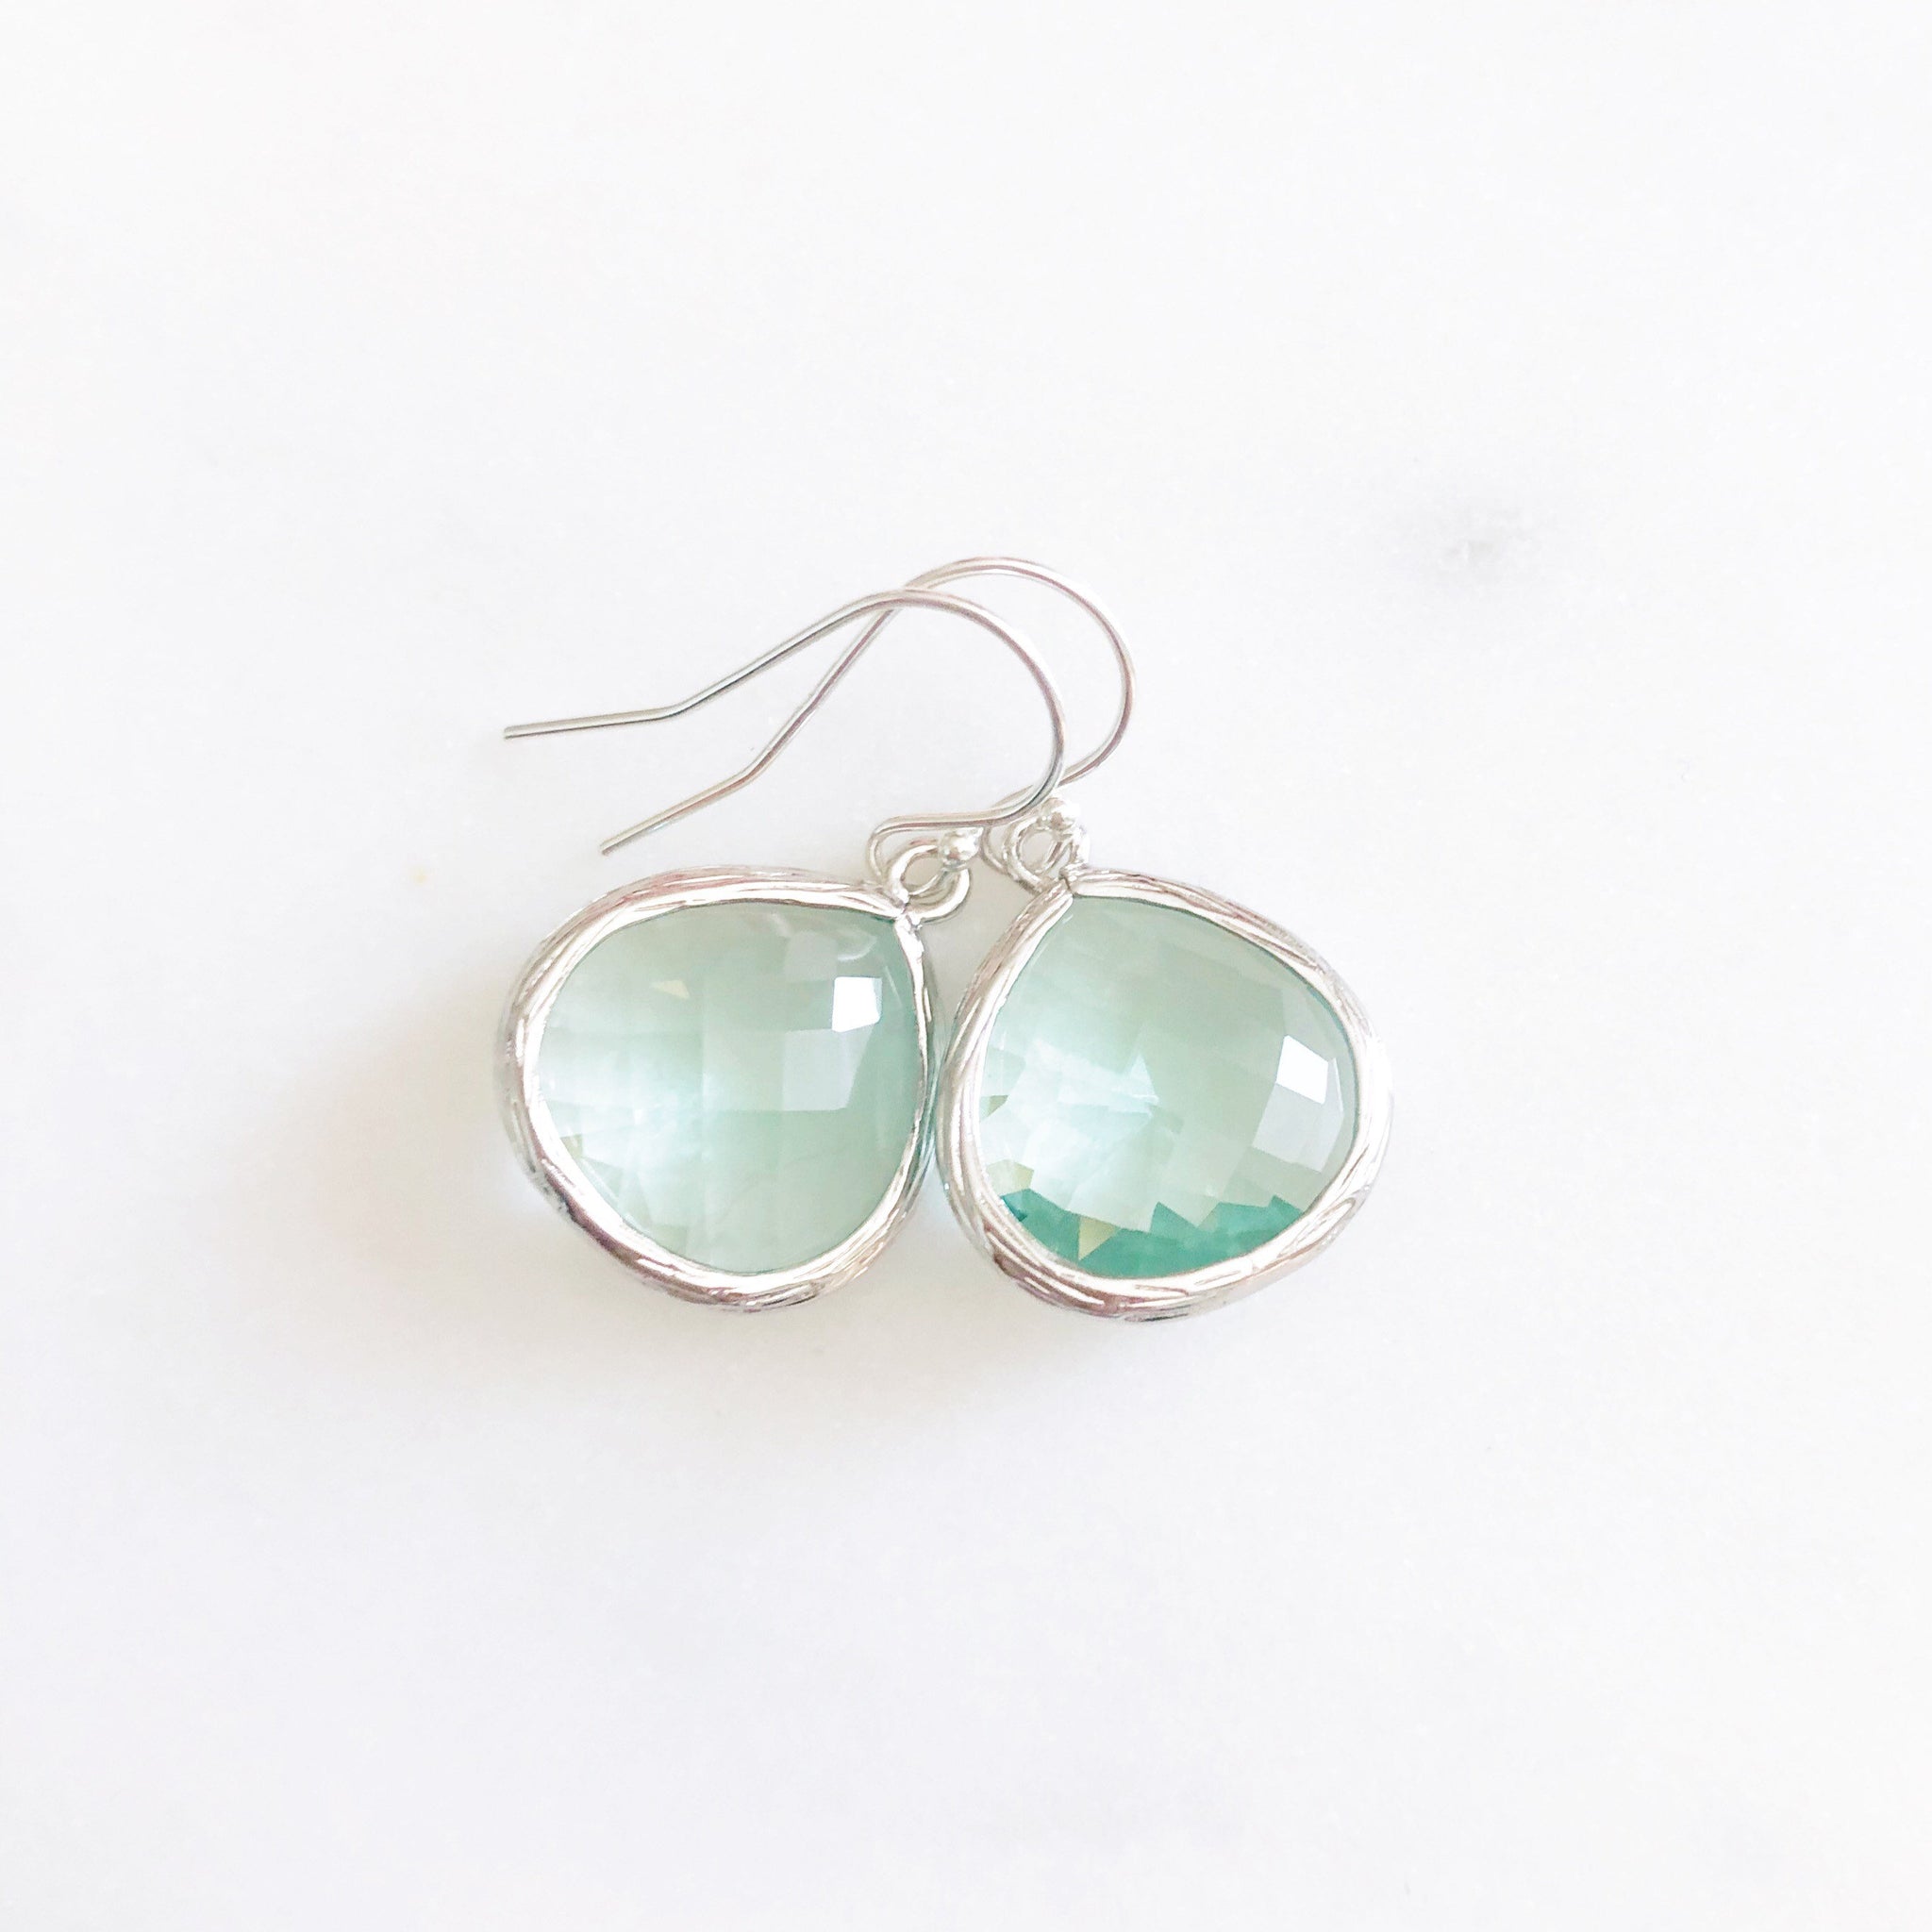 MOLLY | Silver + Sea Green Faceted Glass Drop Earrings | Sea Green Drops Aqua Drop Earrings Silver Erinite Faceted Glass Drops